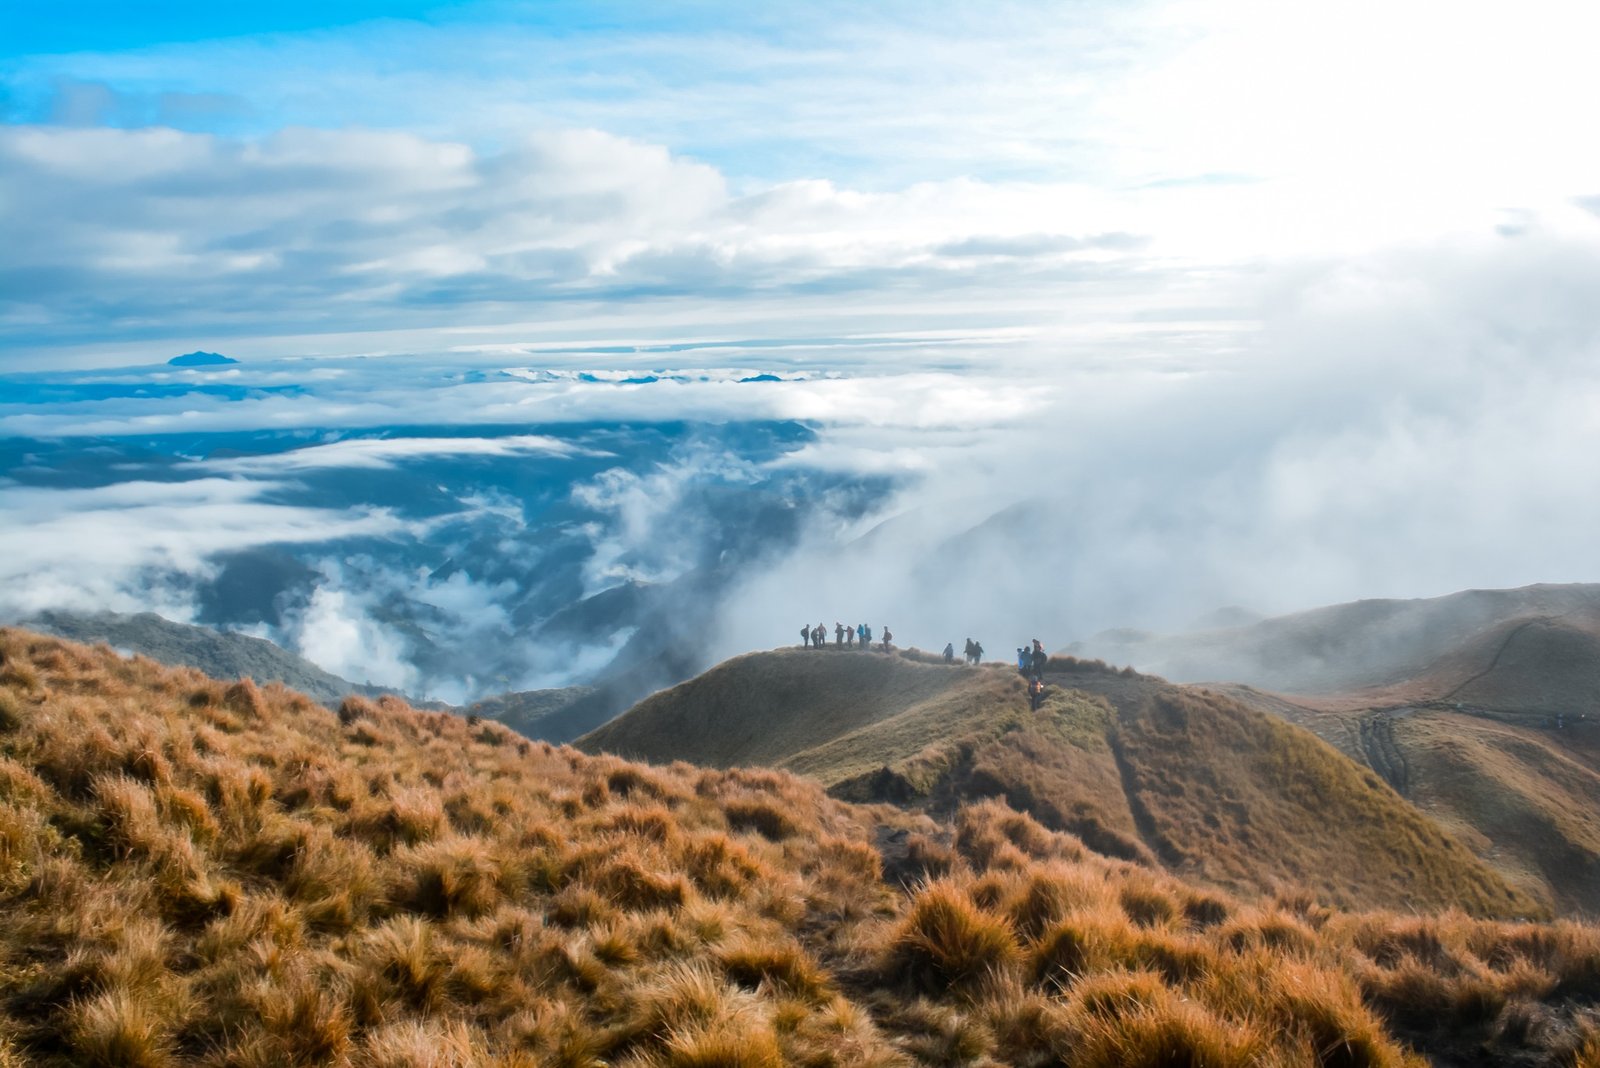 Mt. Pulag Sea of Clouds